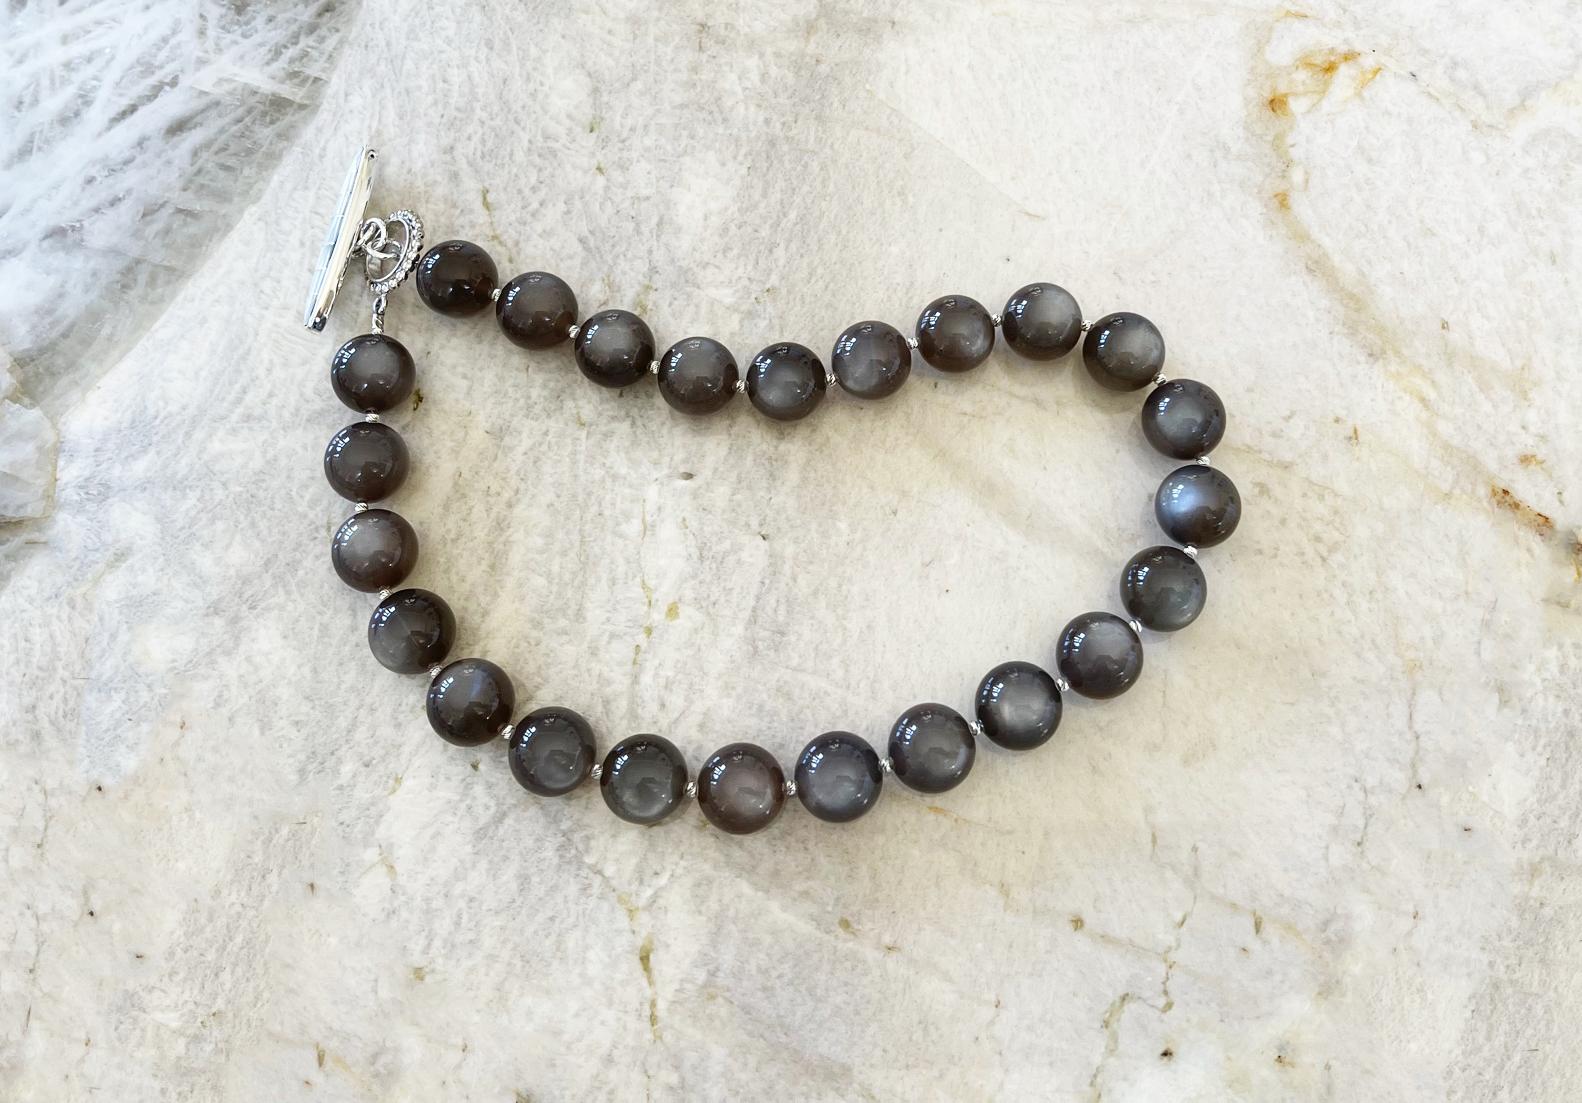 Absolutely breathtaking shimmering chatoyant top grade dark graphite gray moonstone necklace featuring natural 16mm round gray moonstone beads, sterling silver accent beads, and an elegant handmade toggle clasp with mother of pearl inlay.